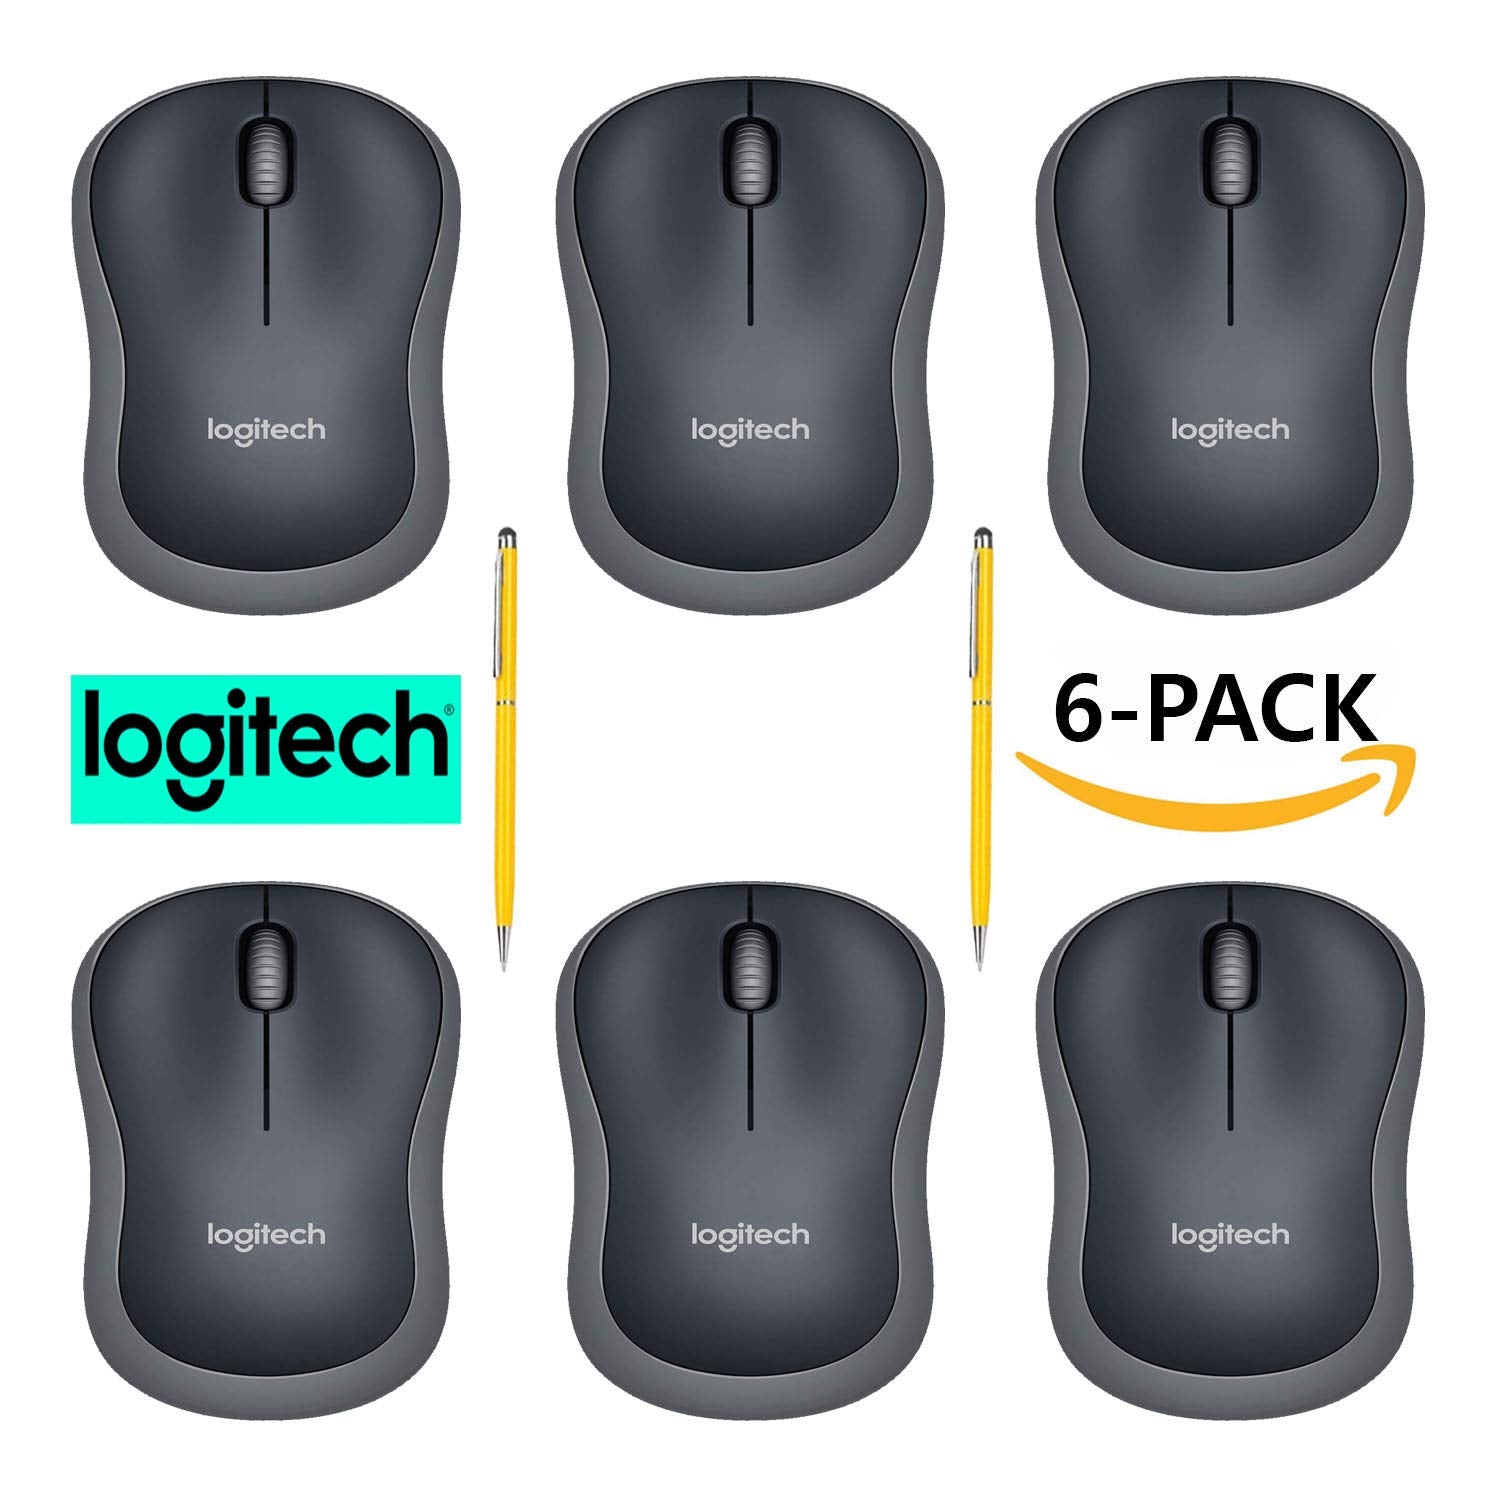 Logitech M185 Wireless Mouse for Computers Laptops Fast Scrolling Bundle (6-Pack + Stylus)